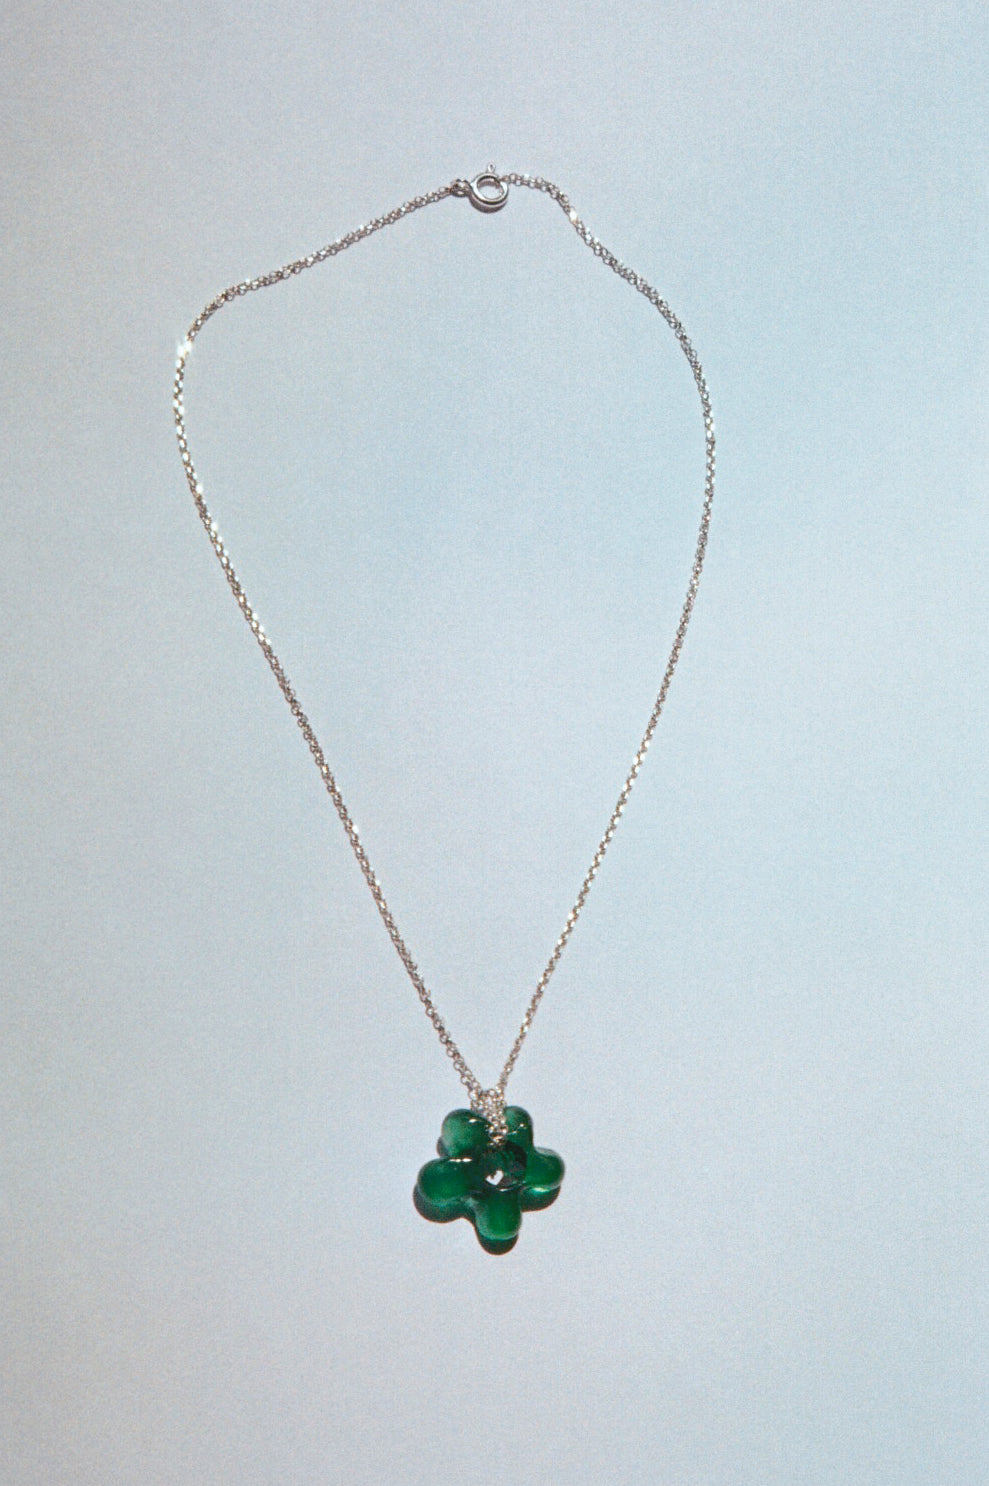 Le Caire necklace - Green